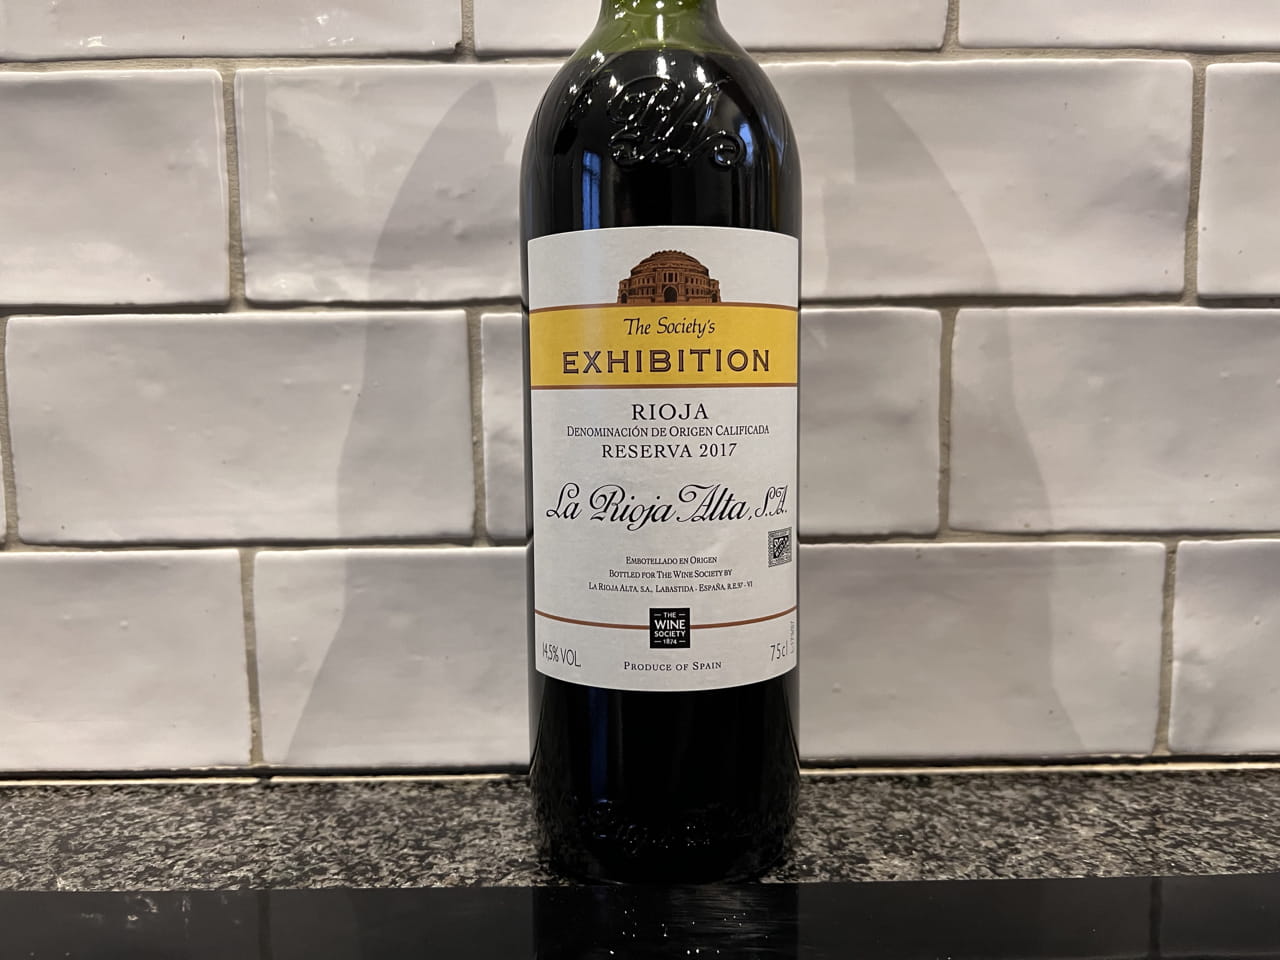 Wine of the Week: The Society’s Exhibition Rioja Reserva 2017